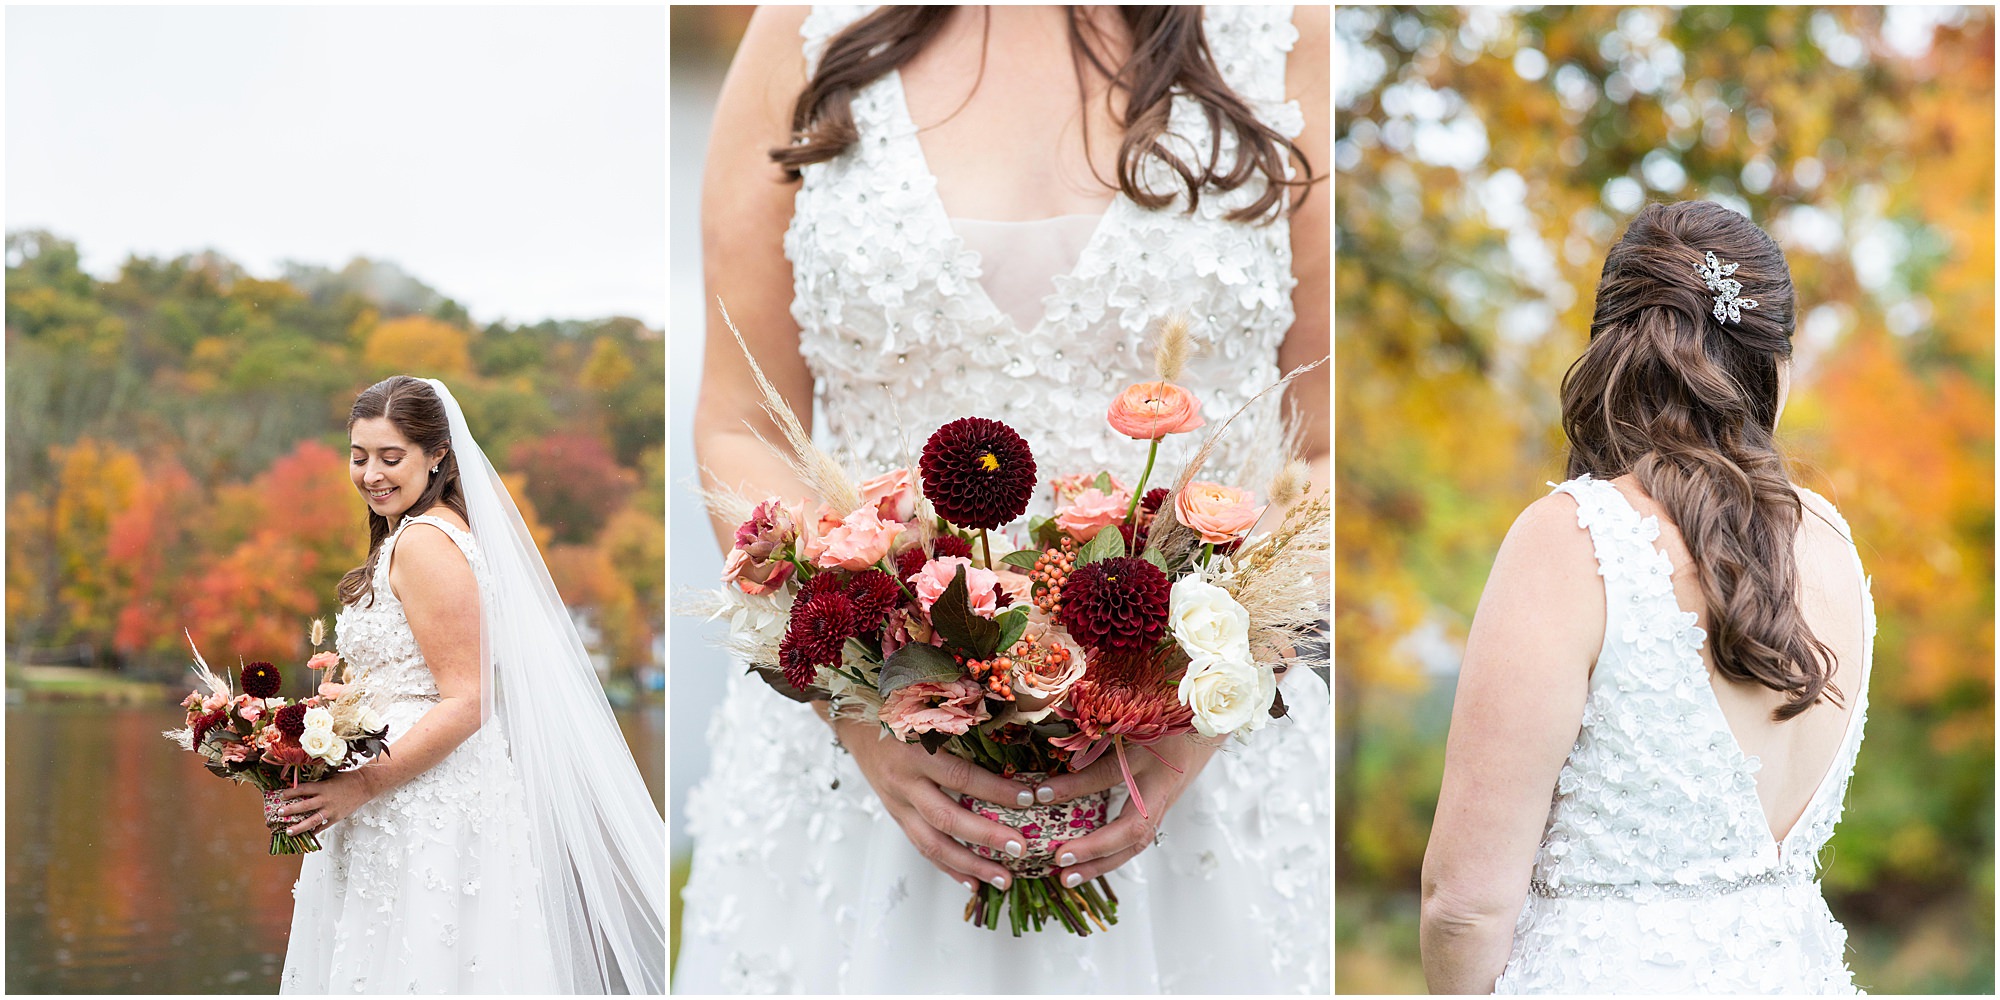 Bridal portraits and autumn bouquet at Andre's Lakeside Dining Microwedding